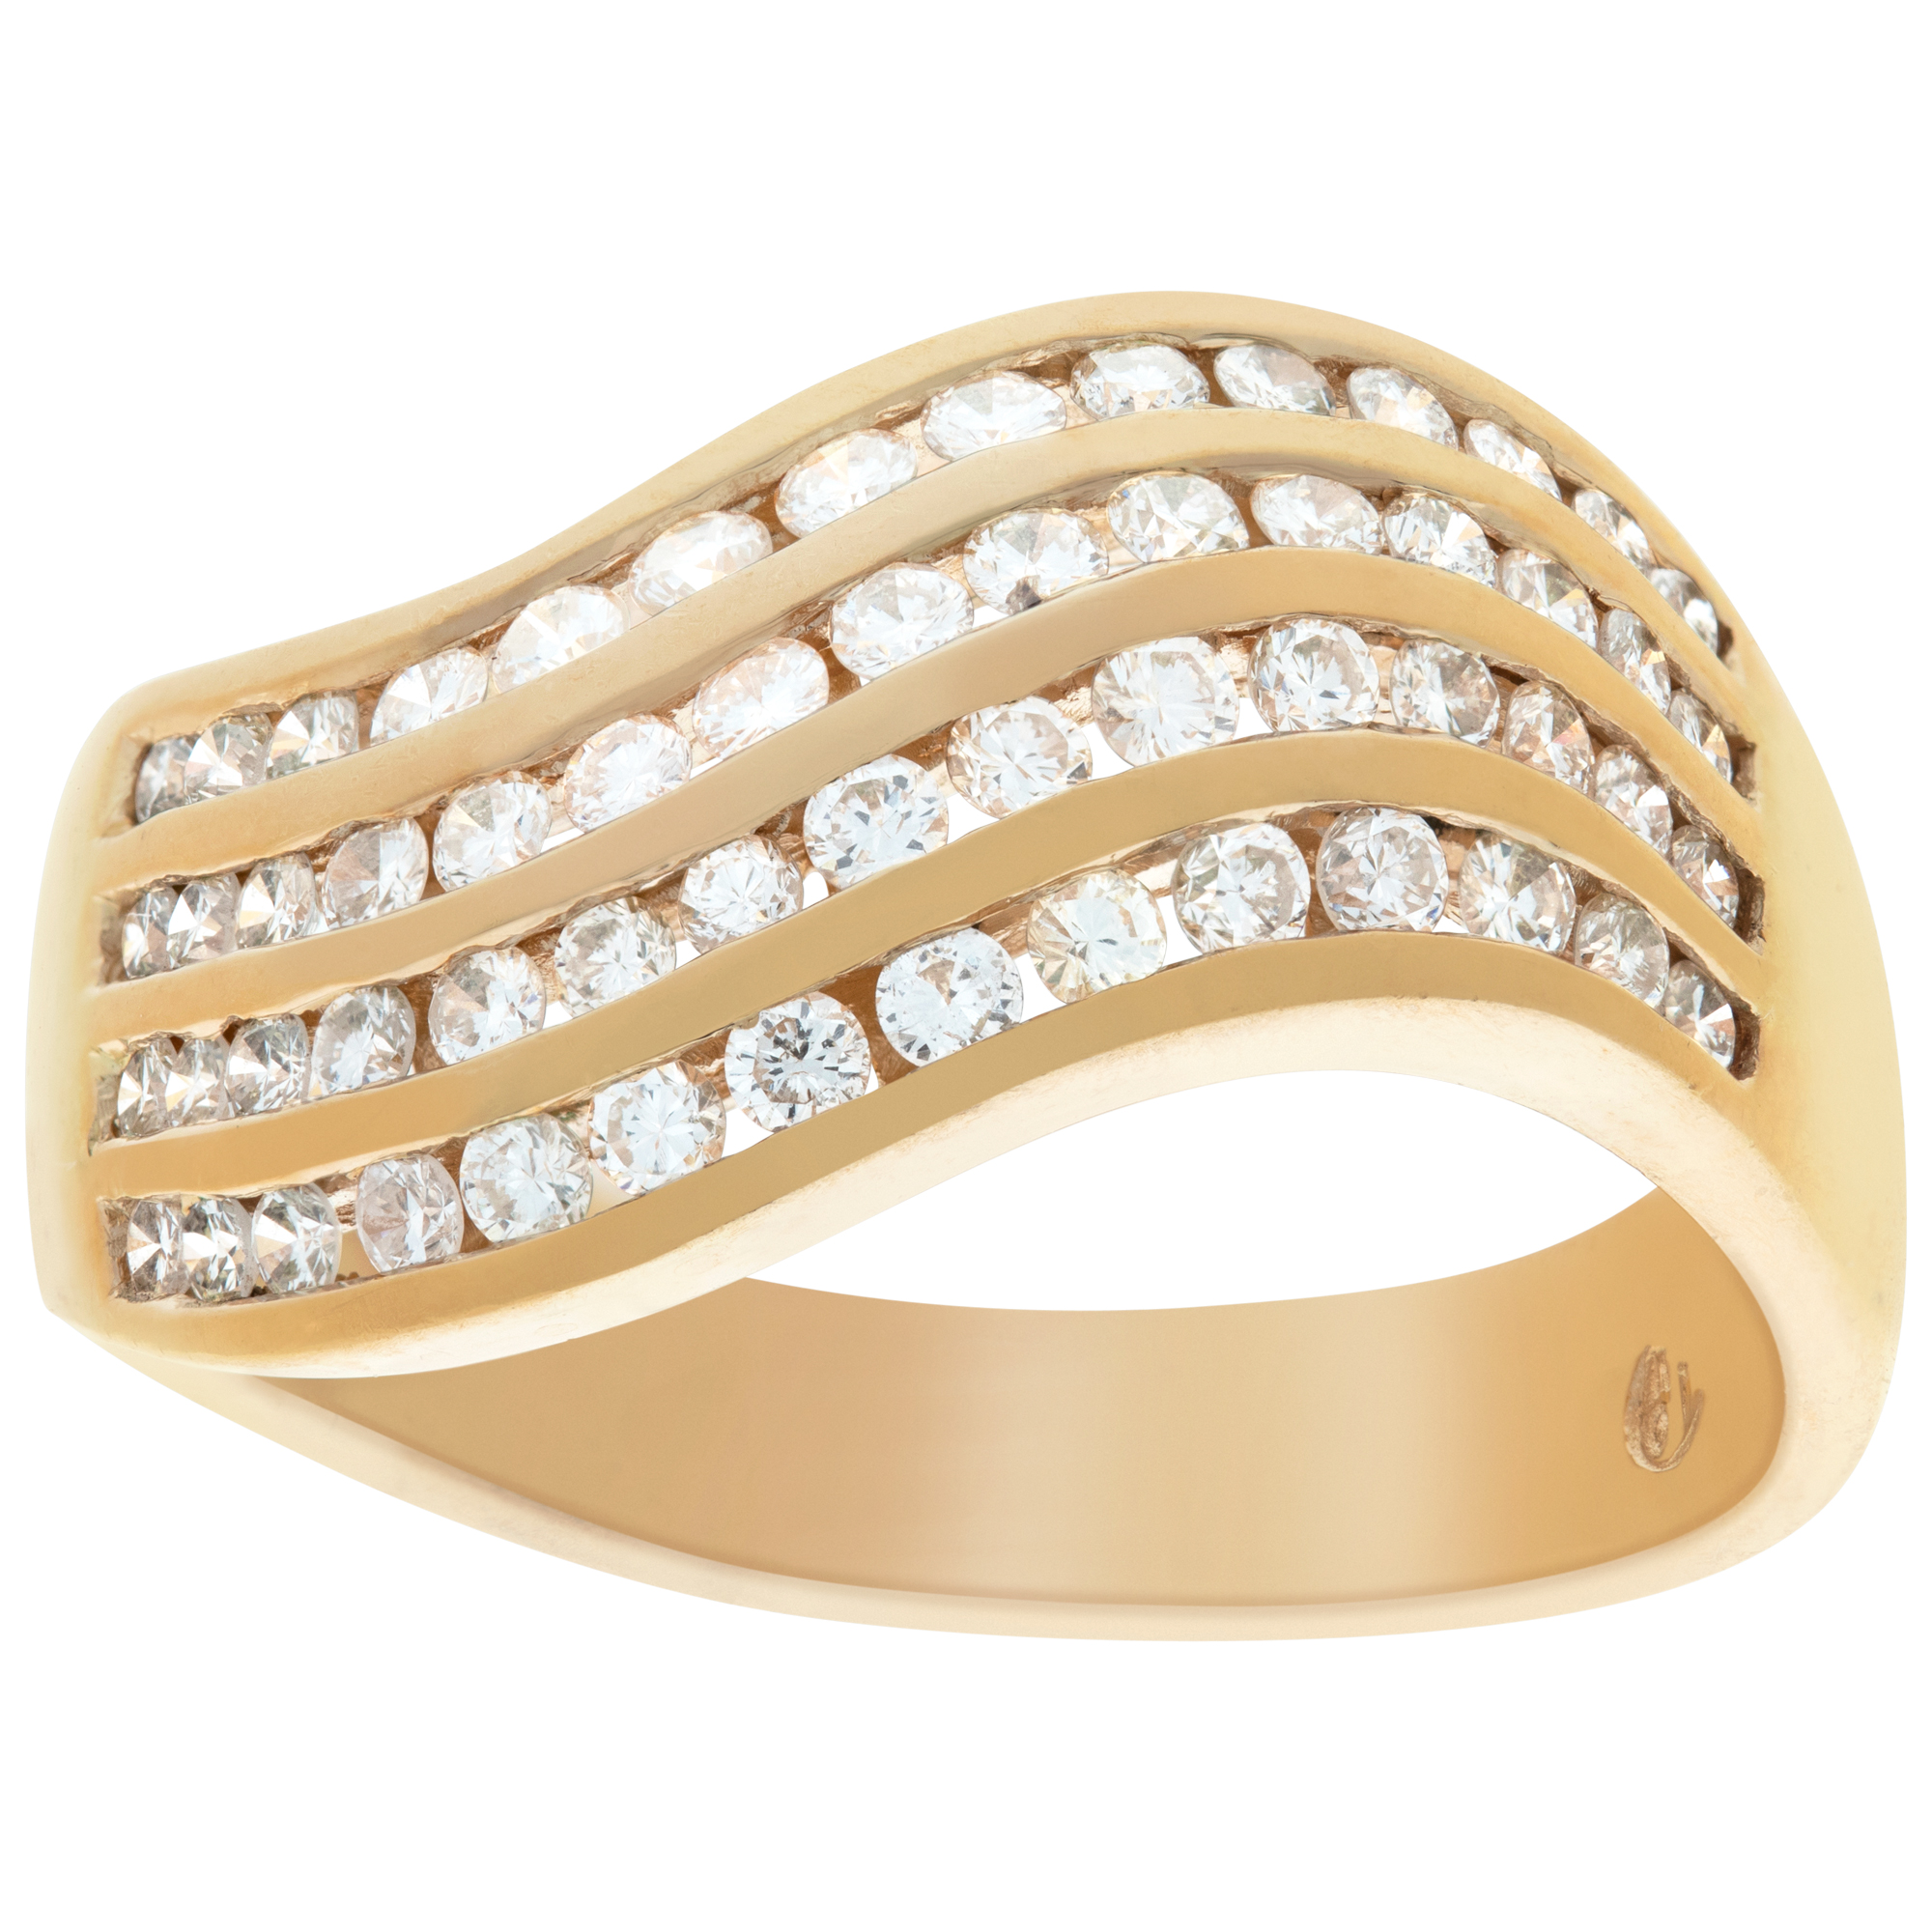 Channel set 4 row diamond wave ring in 18k yellow gold